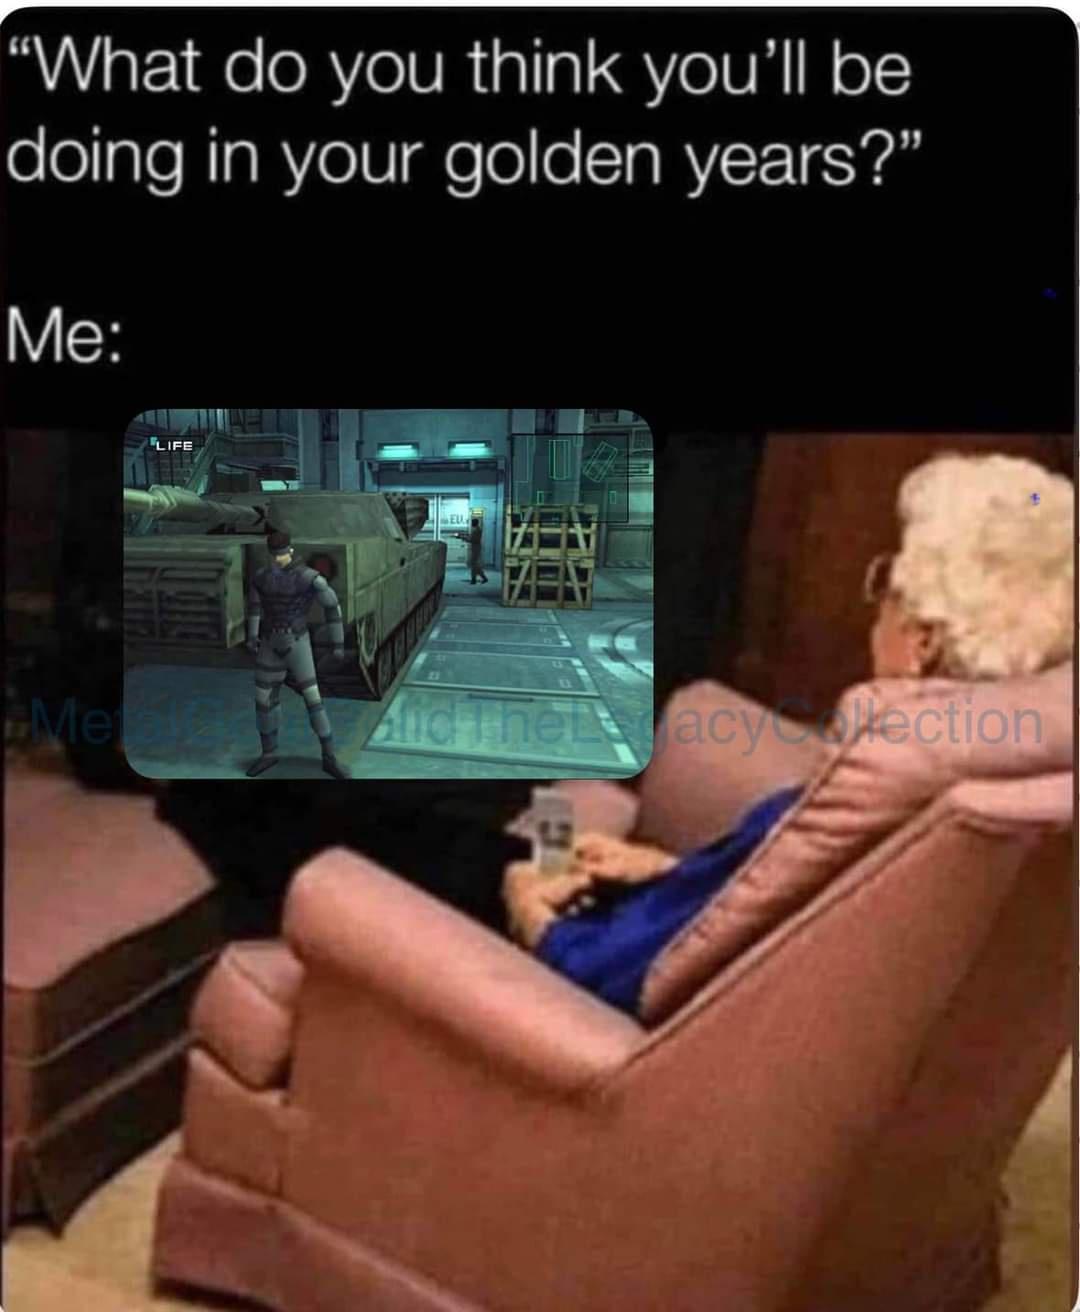 funny memes - media - "What do you think you'll be doing in your golden years?" Me Life Eu Aid Theracy lection